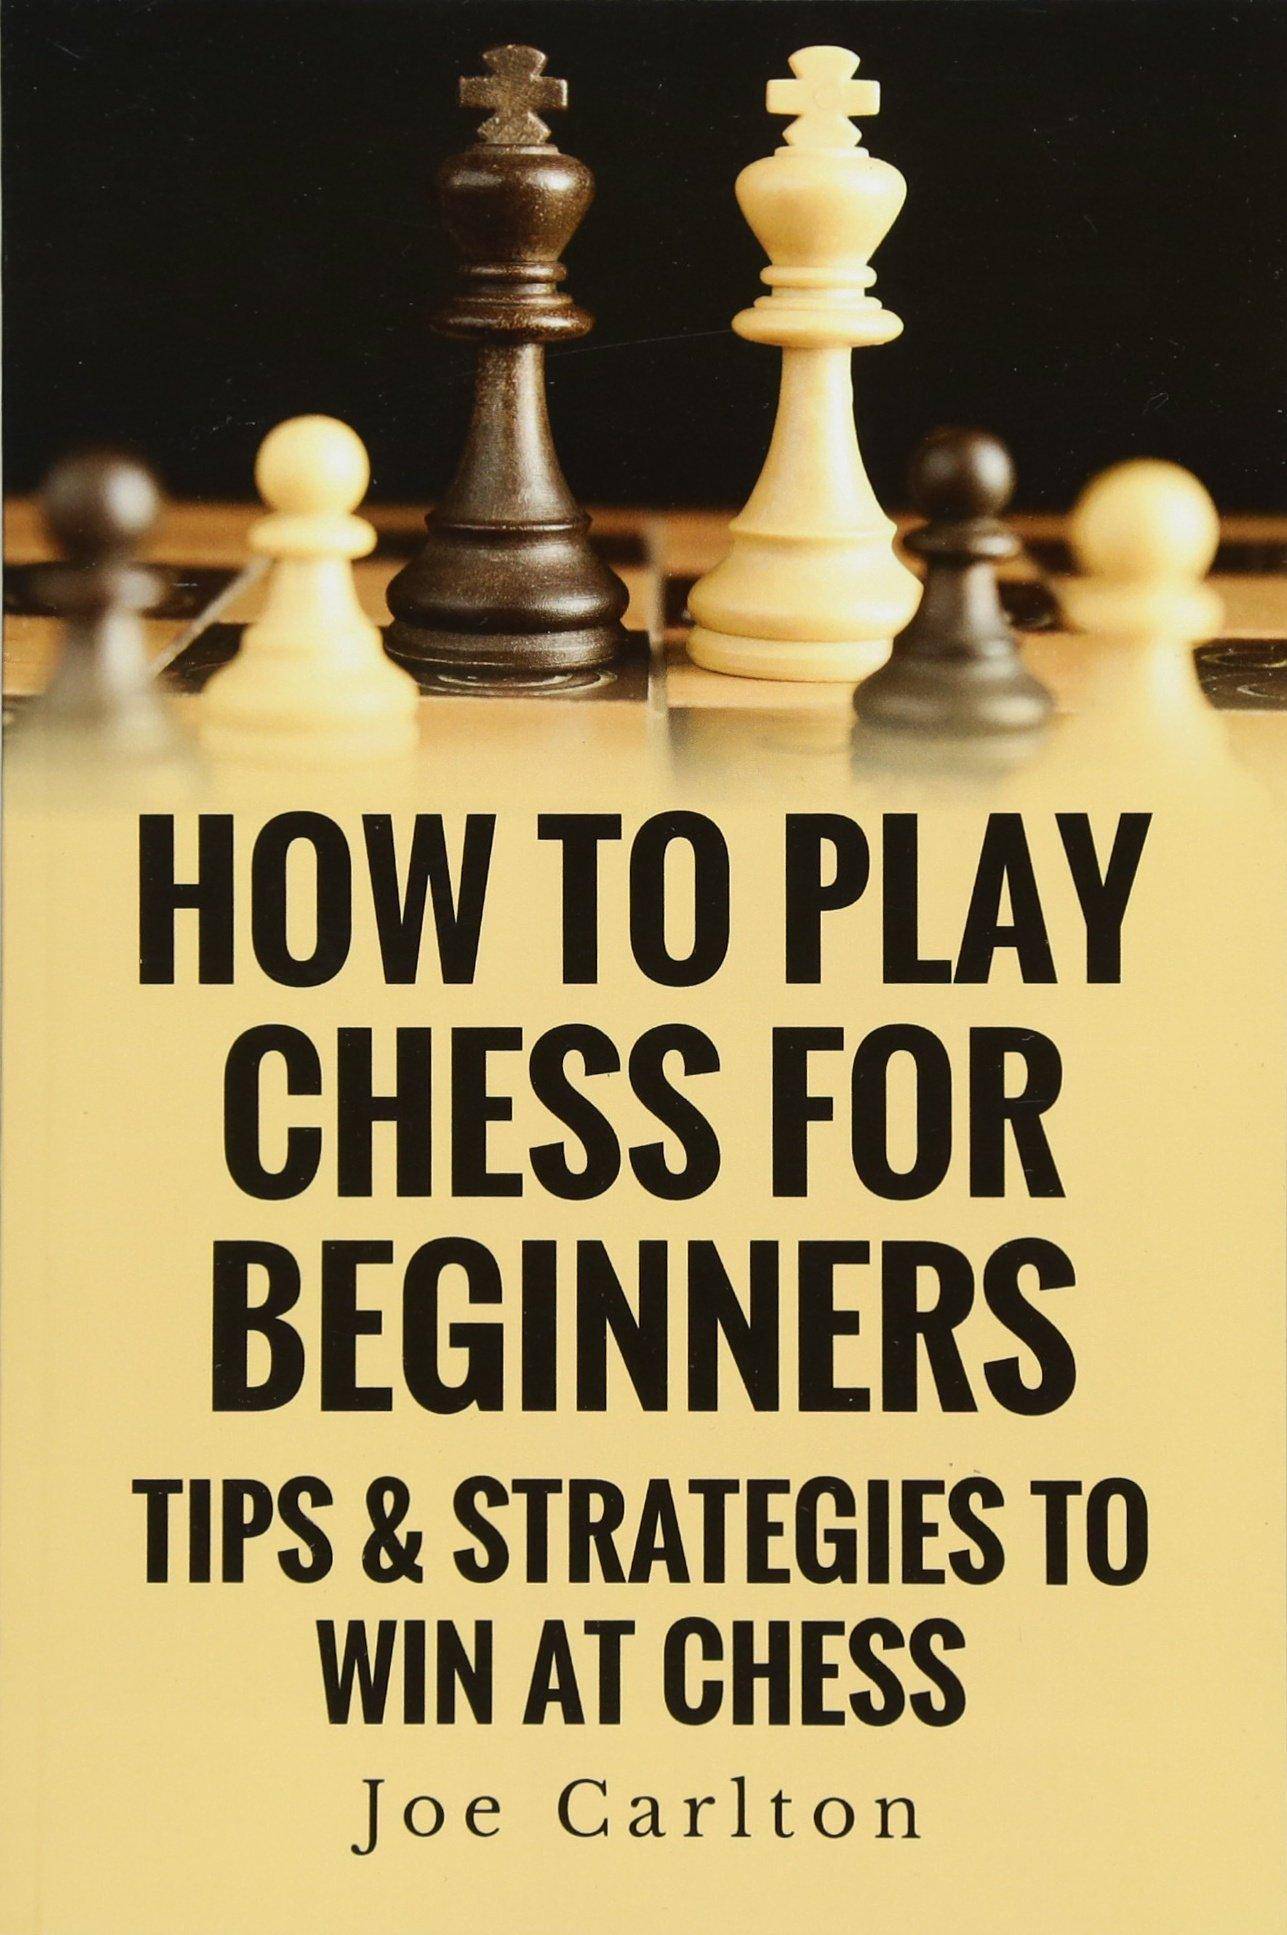 How To Play Chess For Beginners - SureShot Books Publishing LLC